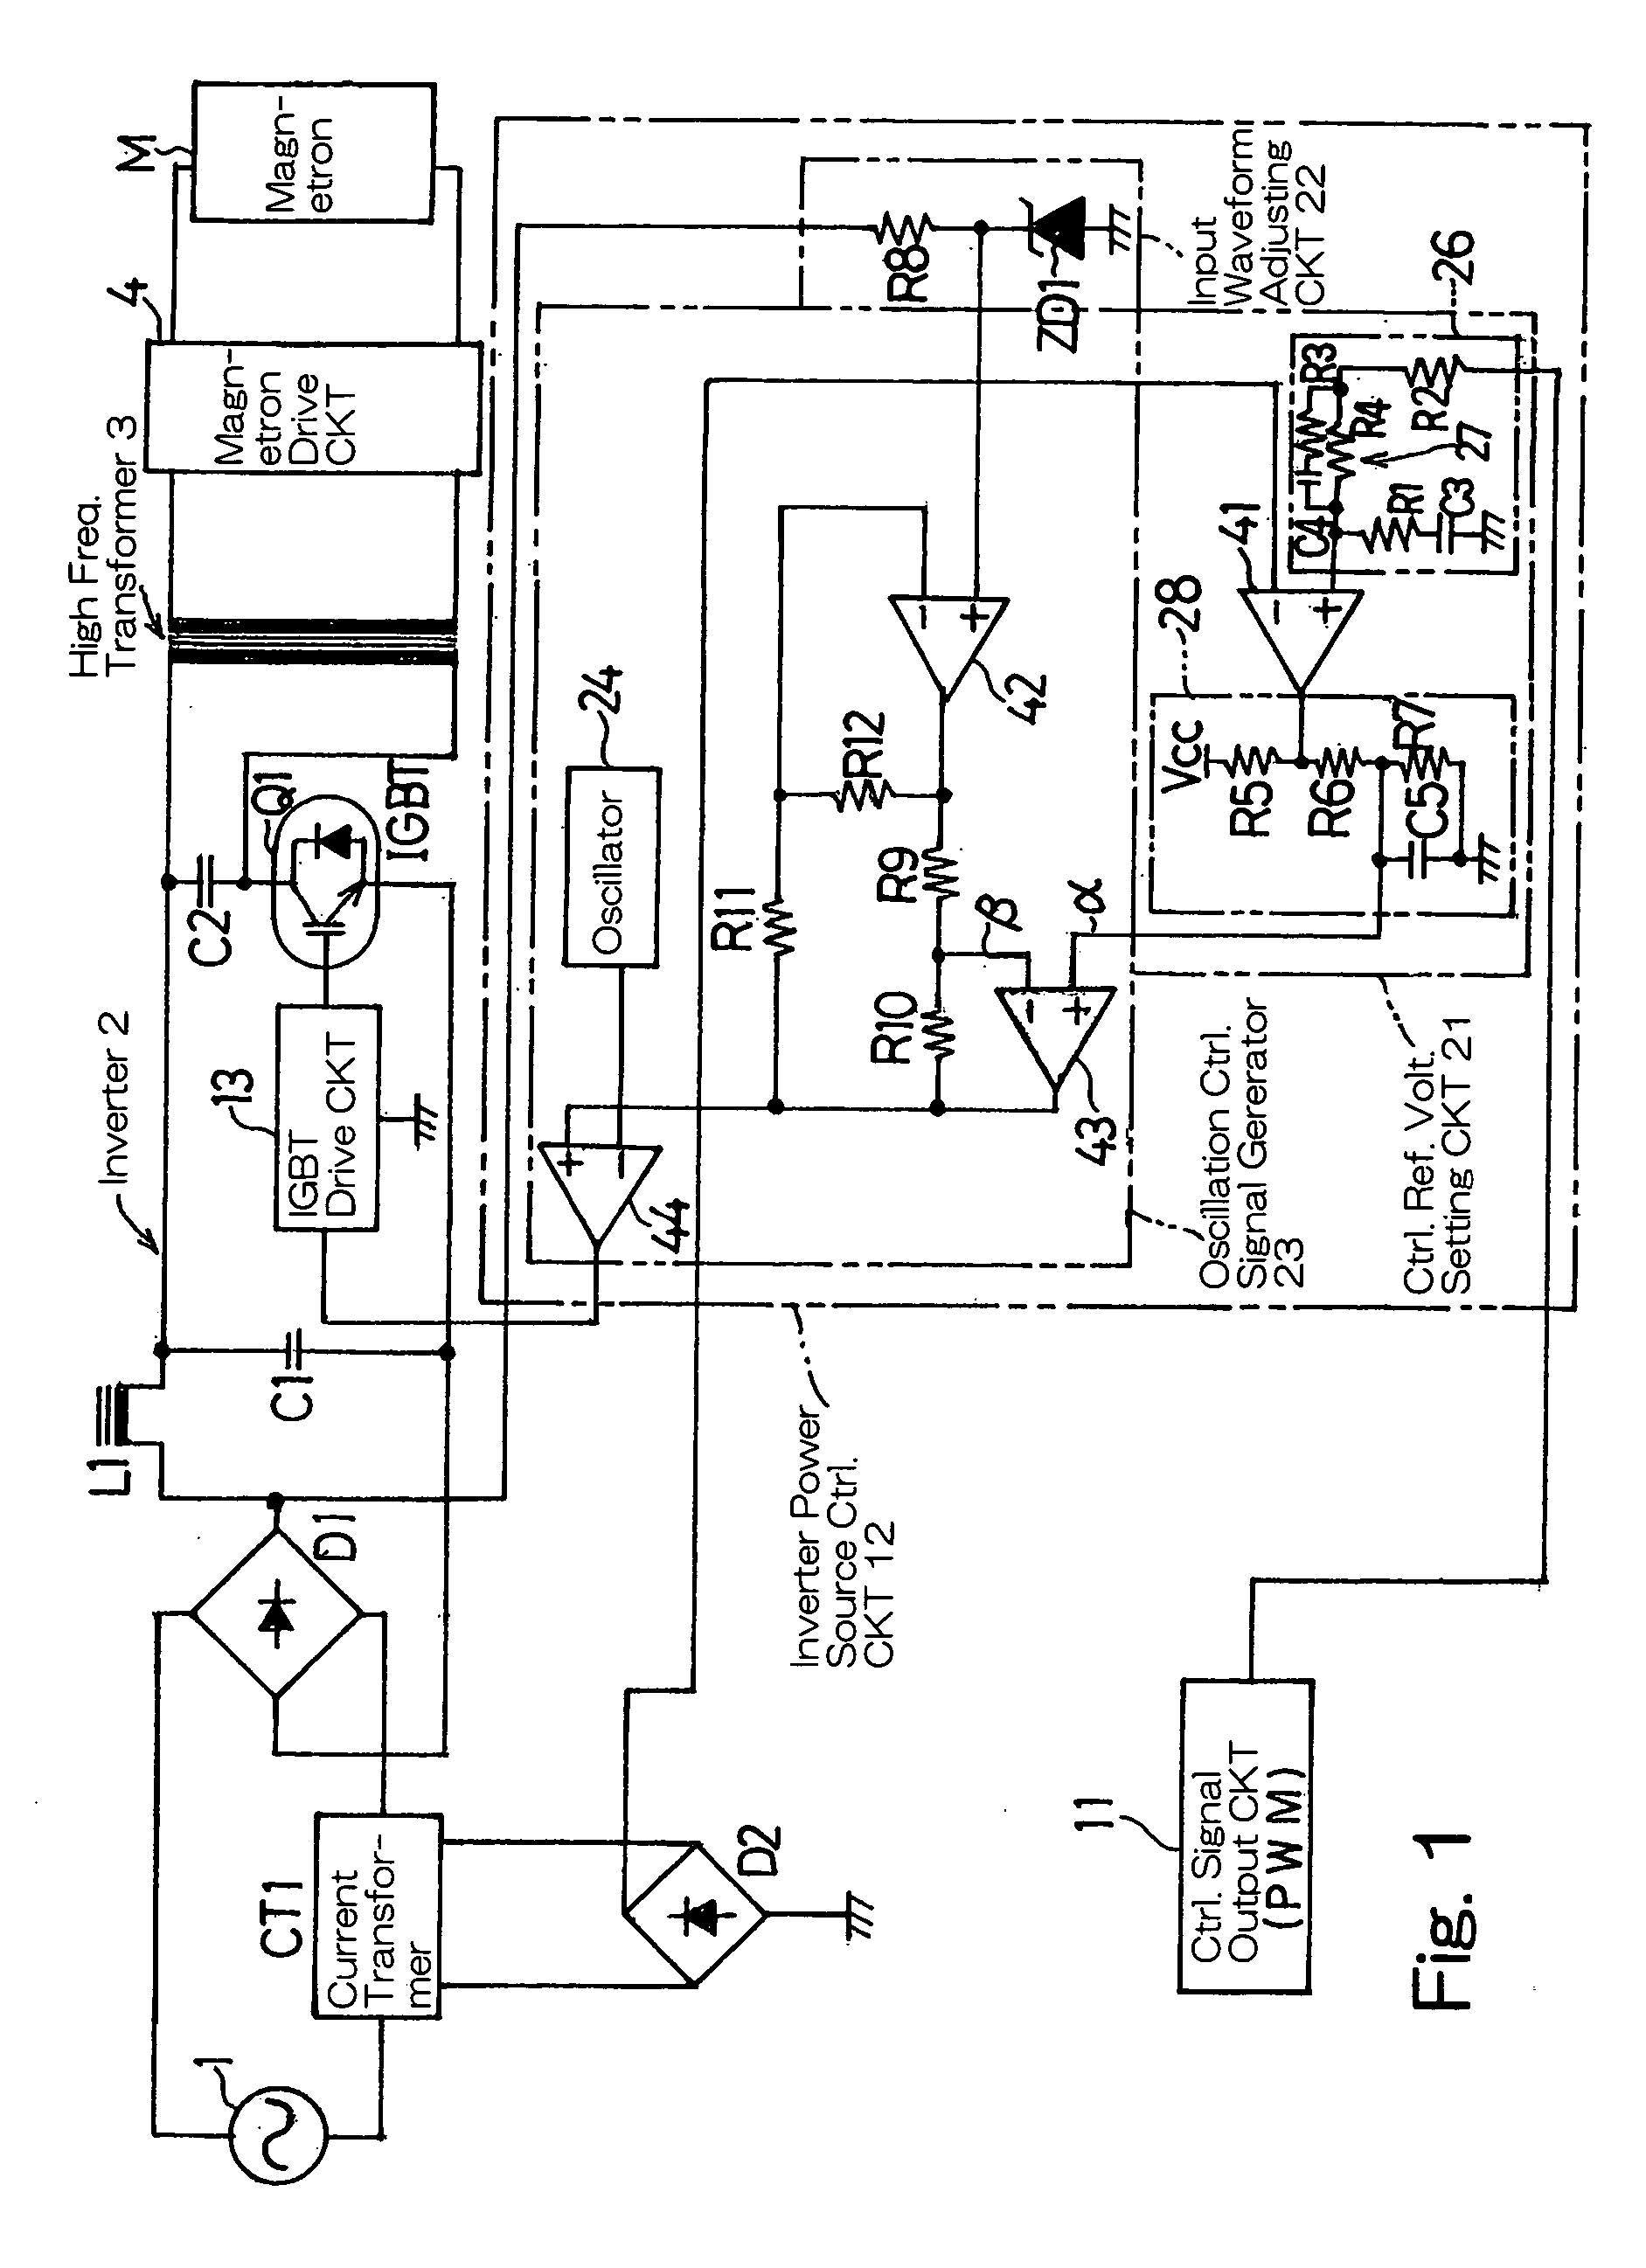 Inverter power source control circuit for high-frequency heater